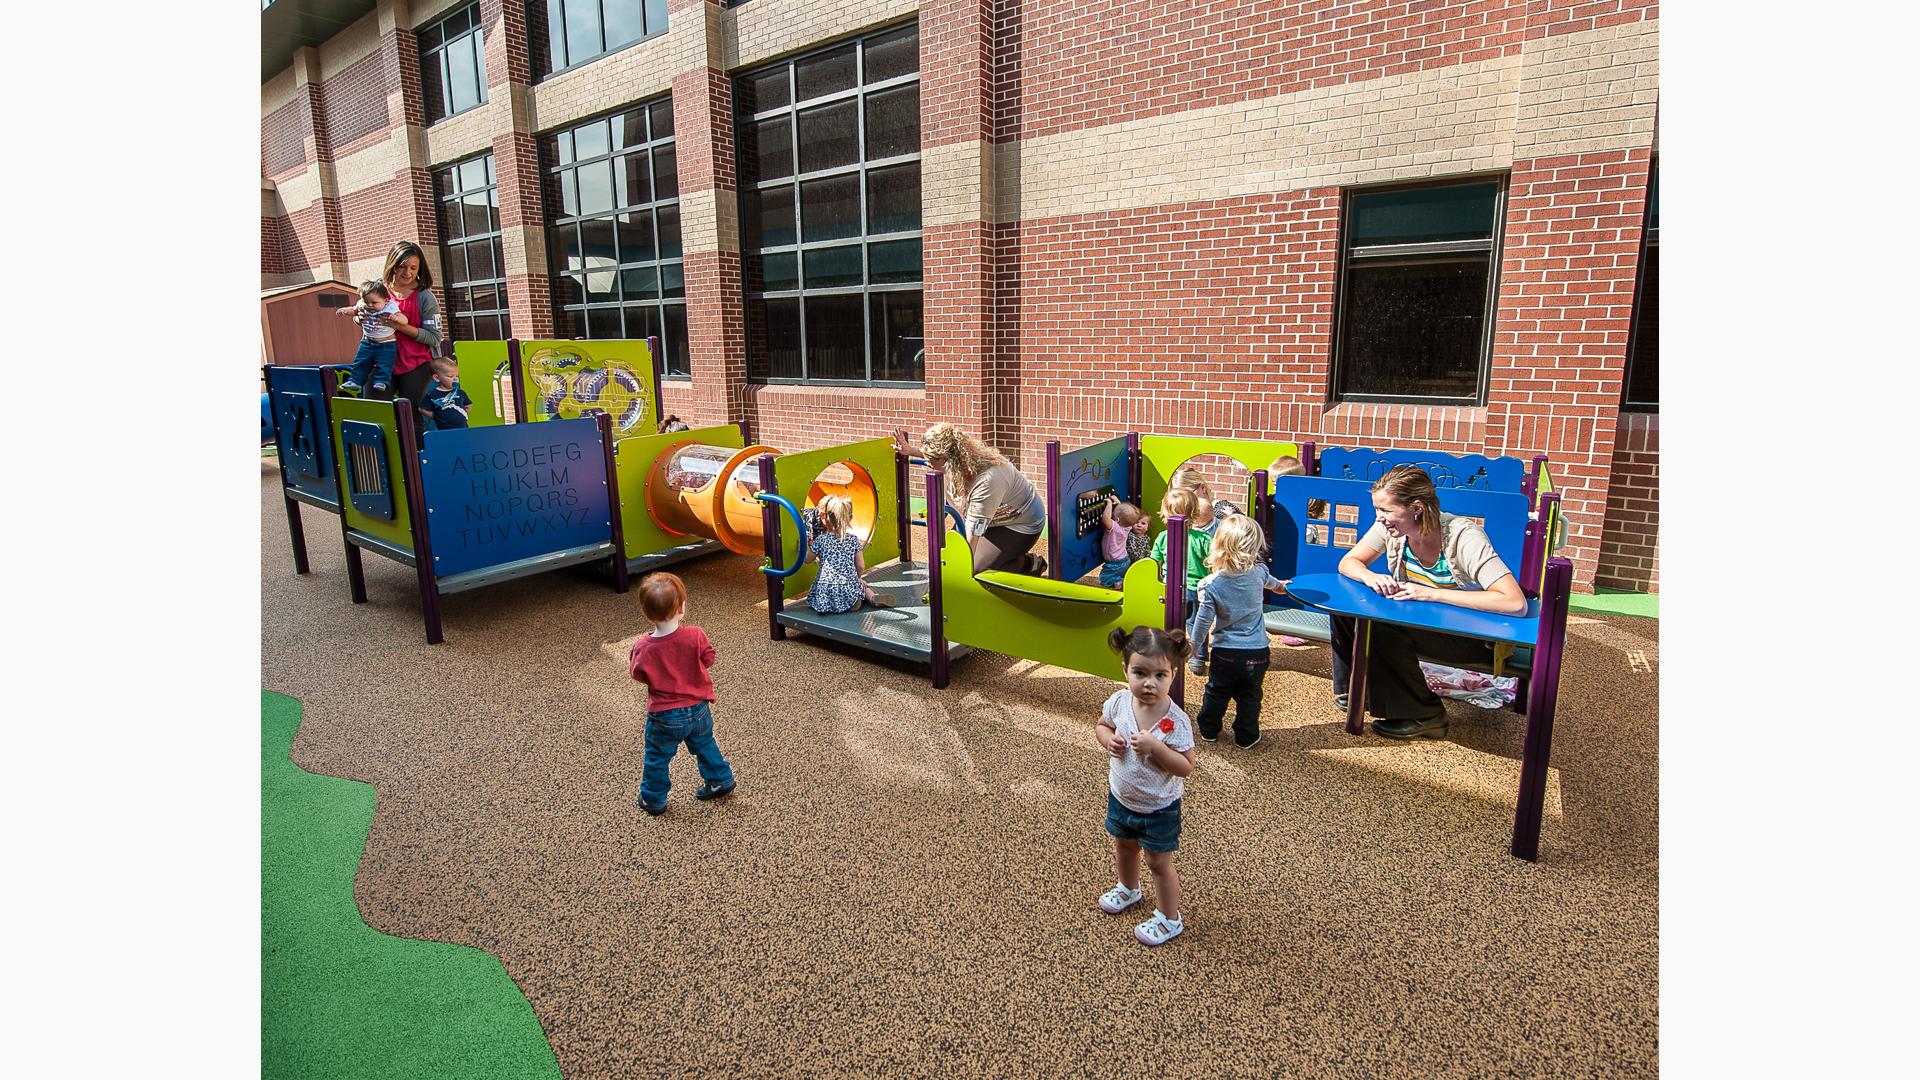 Toddlers play with their teachers at multiple play panels making up a play structure next to a brick building. 